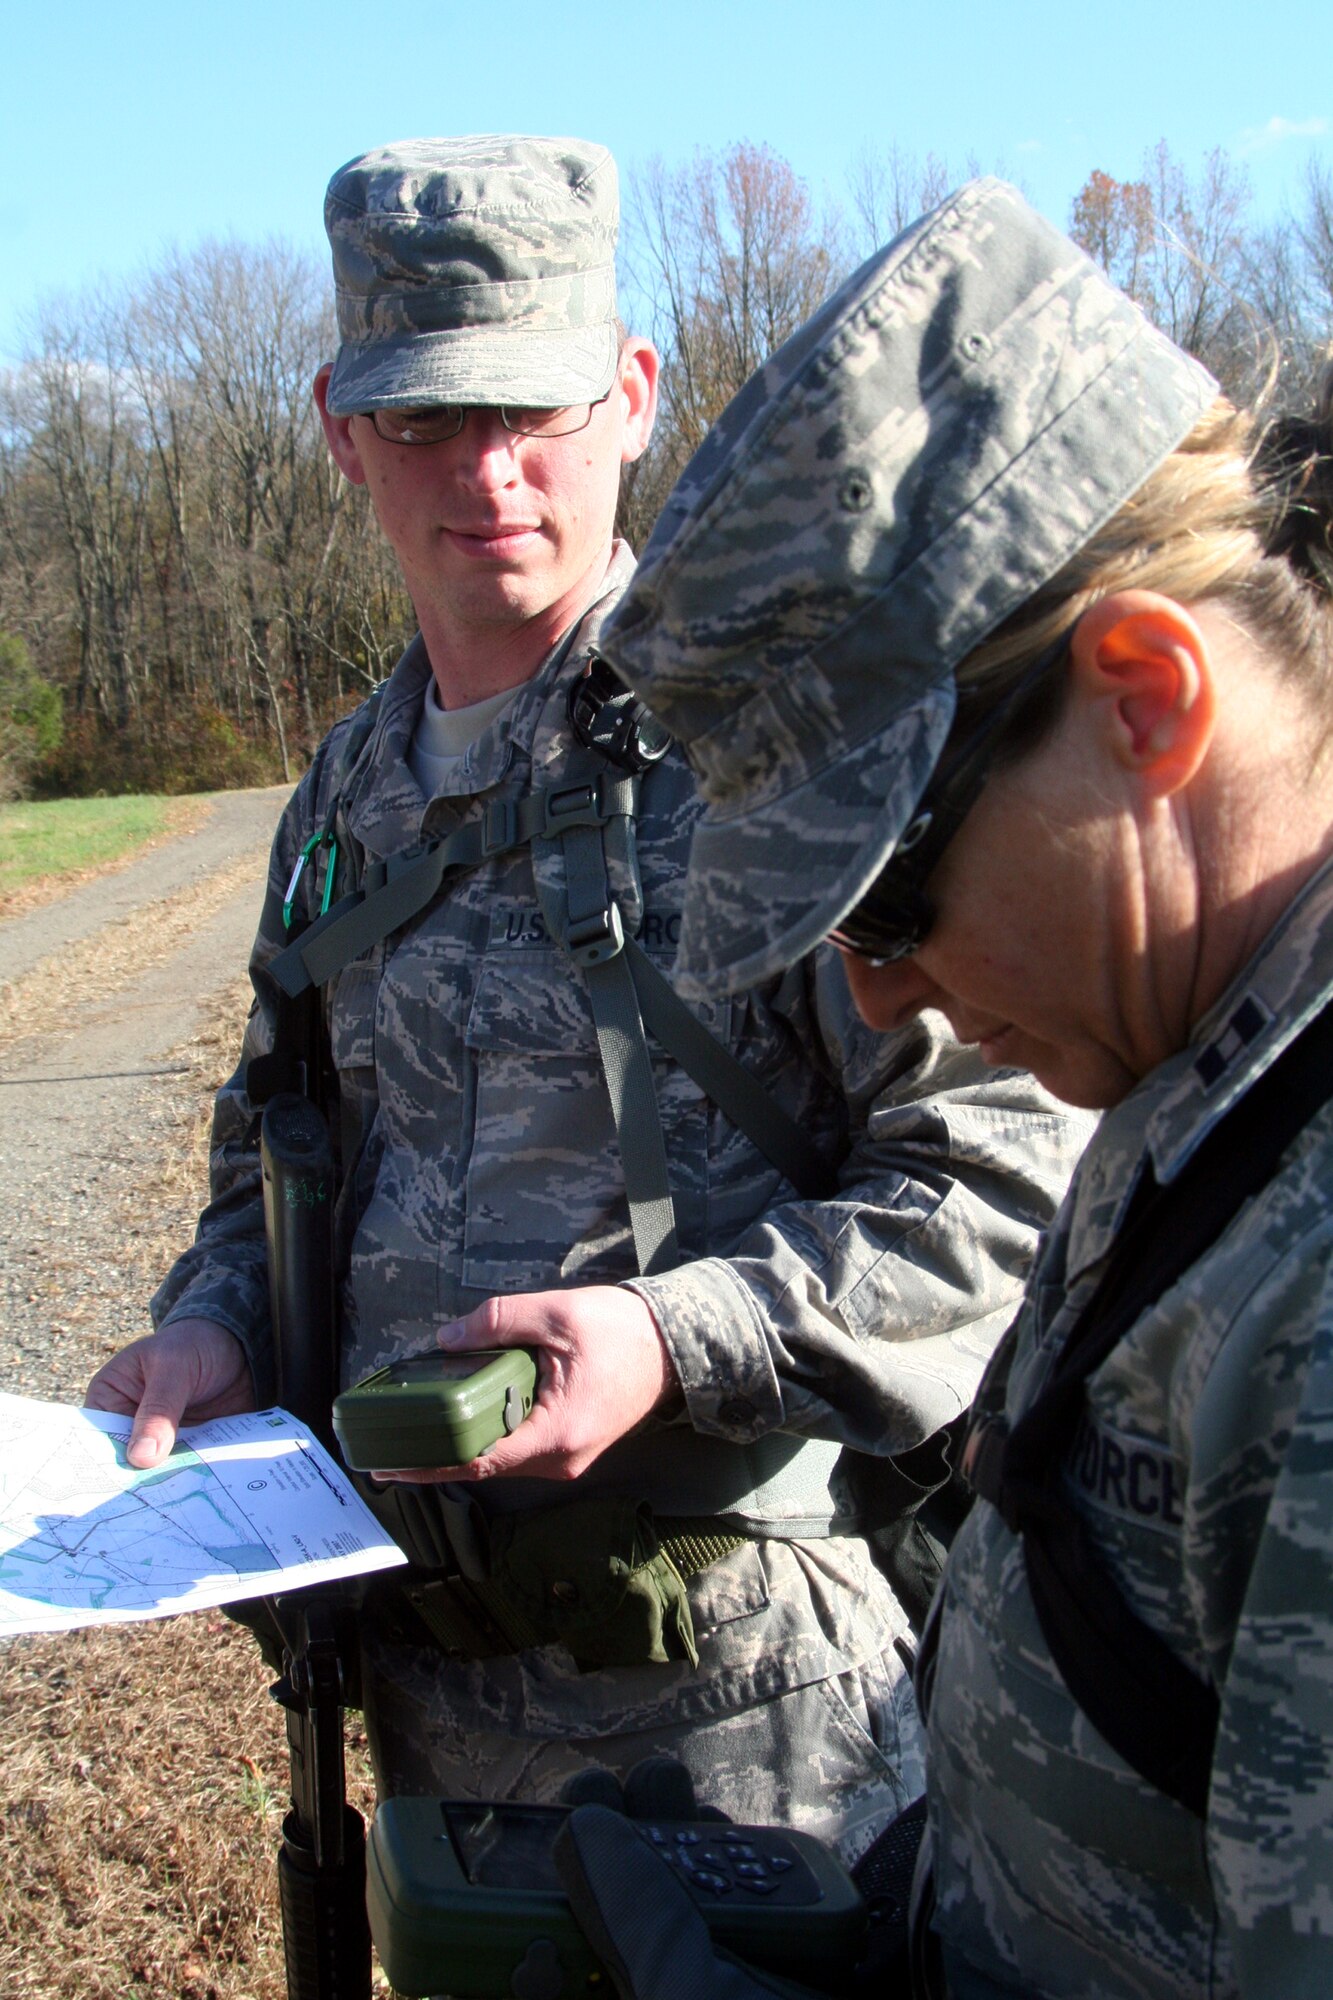 Students in the Combat Airman Skills Training Course 10-1A, taught by the U.S. Air Force Expeditionary Center's 421st Combat Training Squadron, prepare Global Positioning System devices and maps for a day of land navigation training in the course on a range at Joint Base McGuire-Dix-Lakehurst, N.J., on Nov. 6, 2009.  The course prepares Airmen for upcoming deployments.  (U.S. Air Force Photo/Tech. Sgt. Scott T. Sturkol)